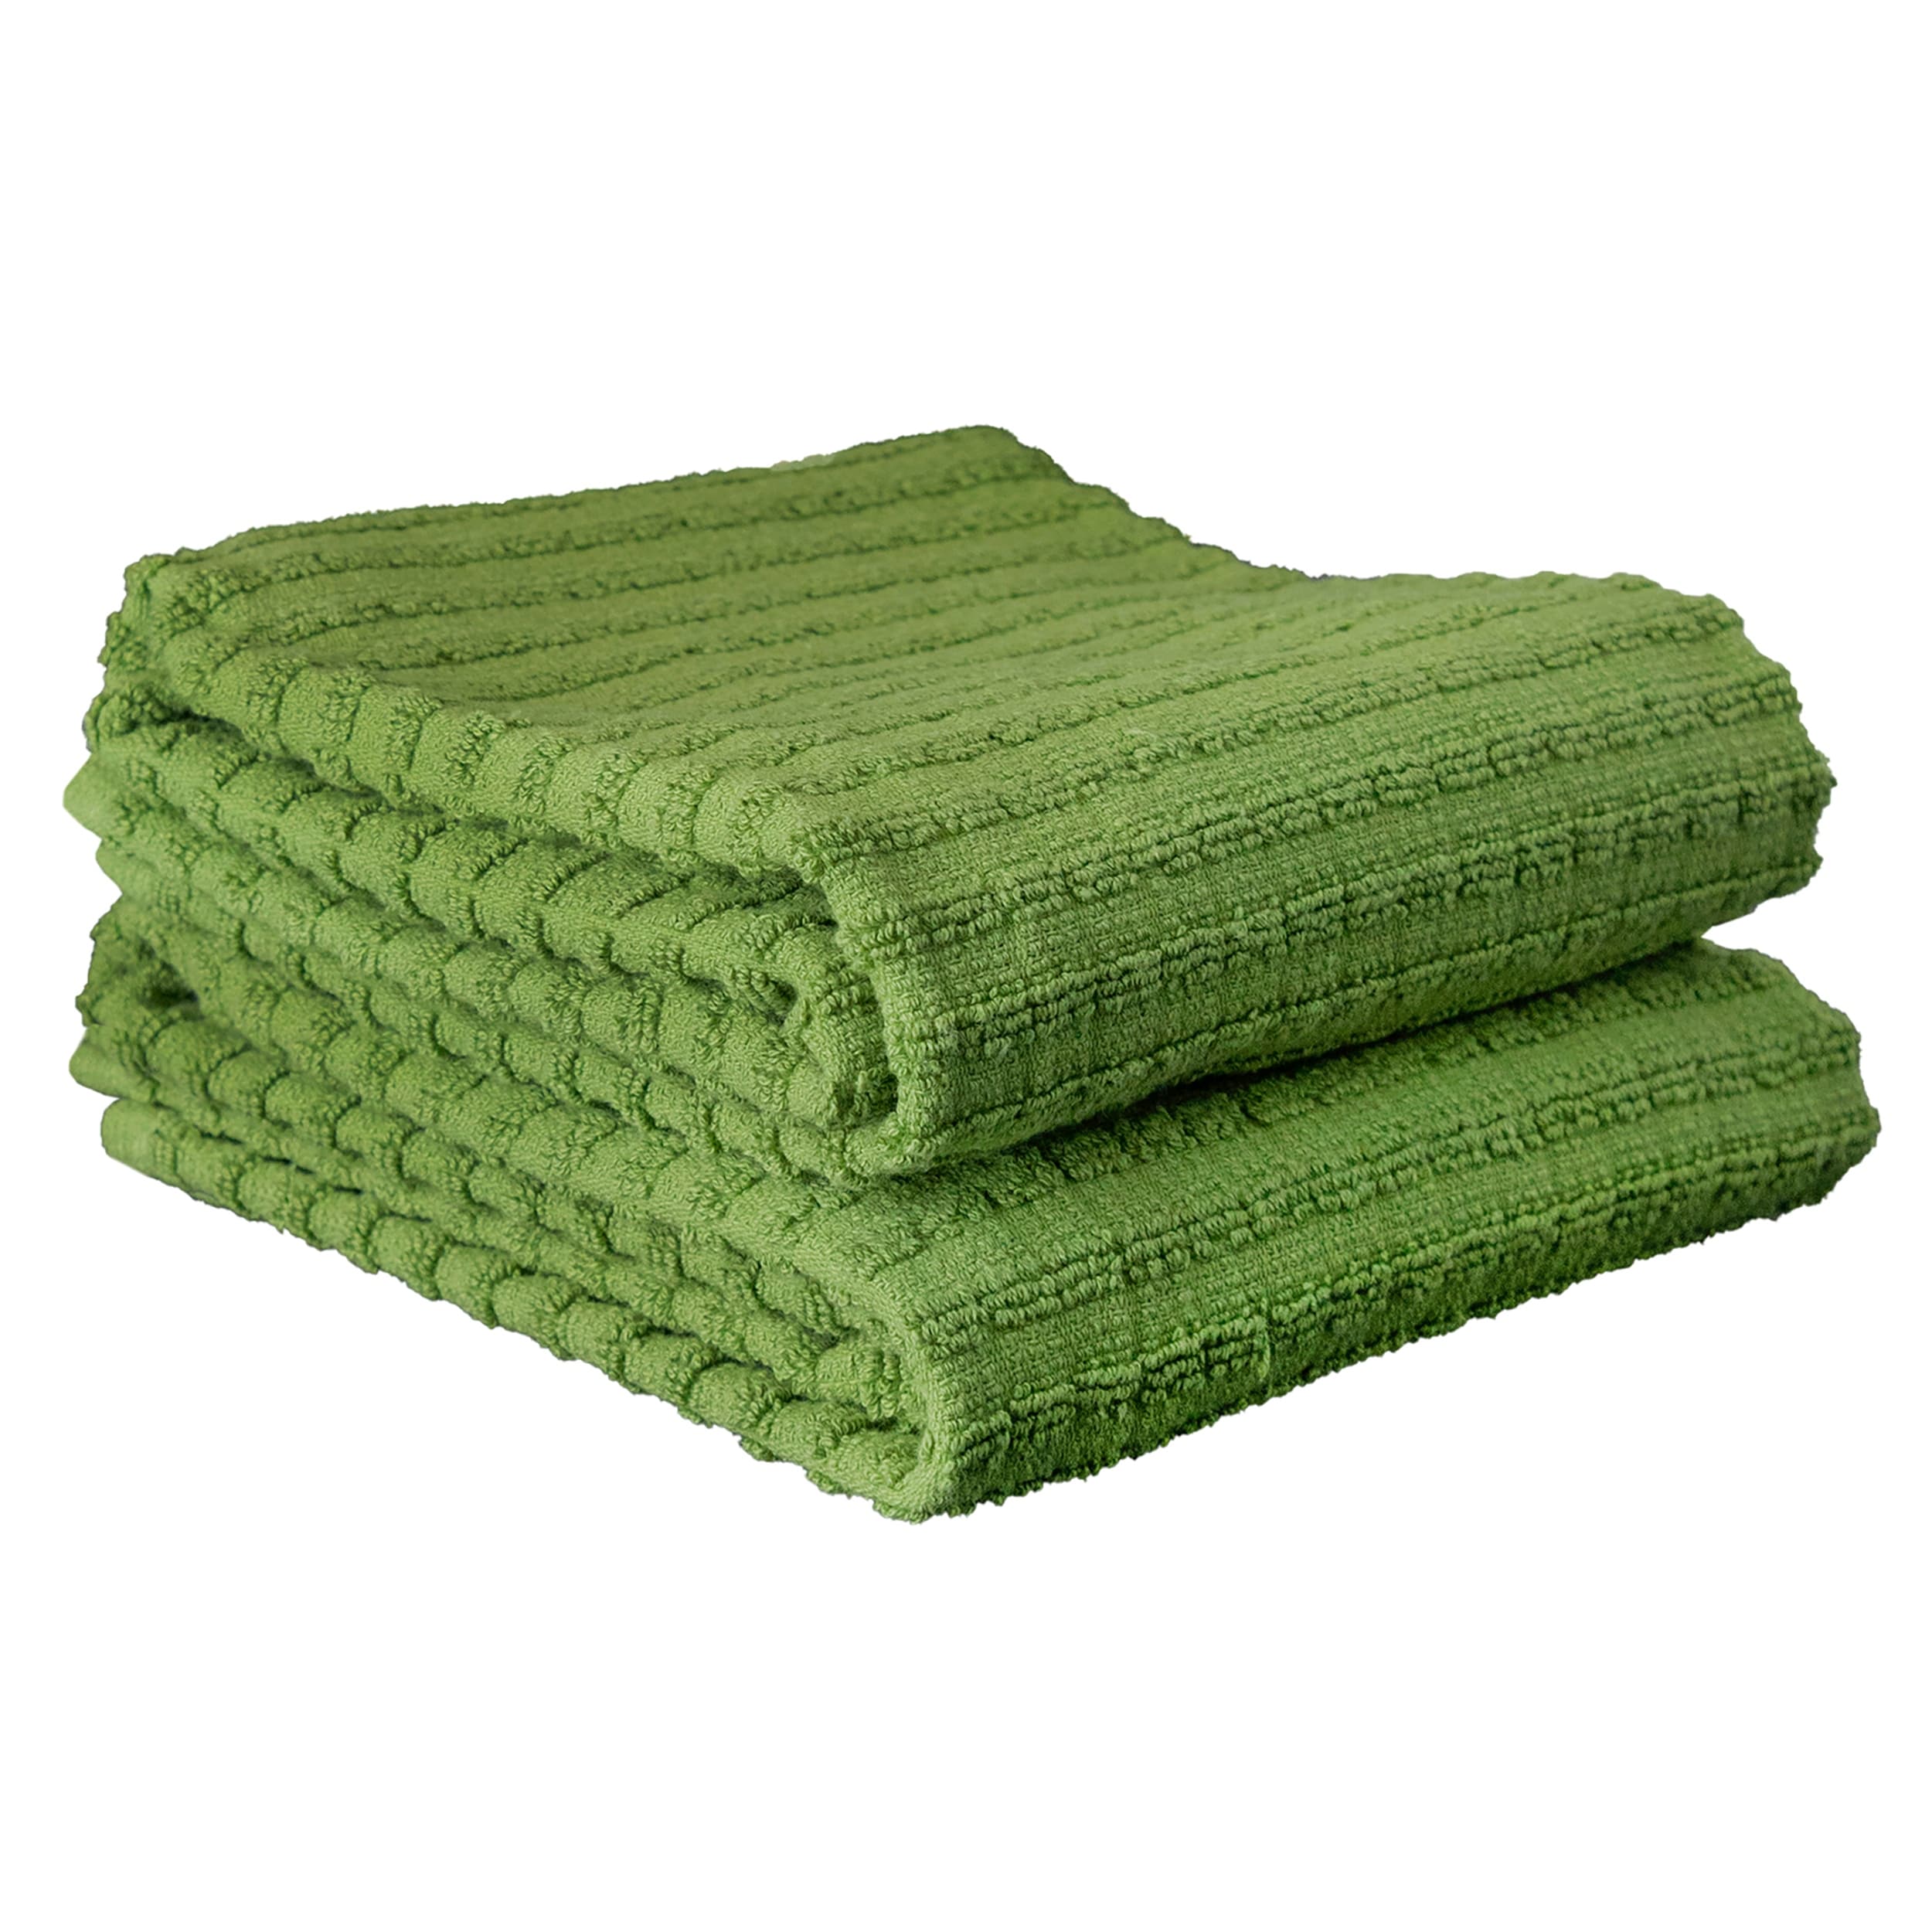 T-Fal Solid and Check Parquet Cotton Kitchen Towel, Two Pack, Green